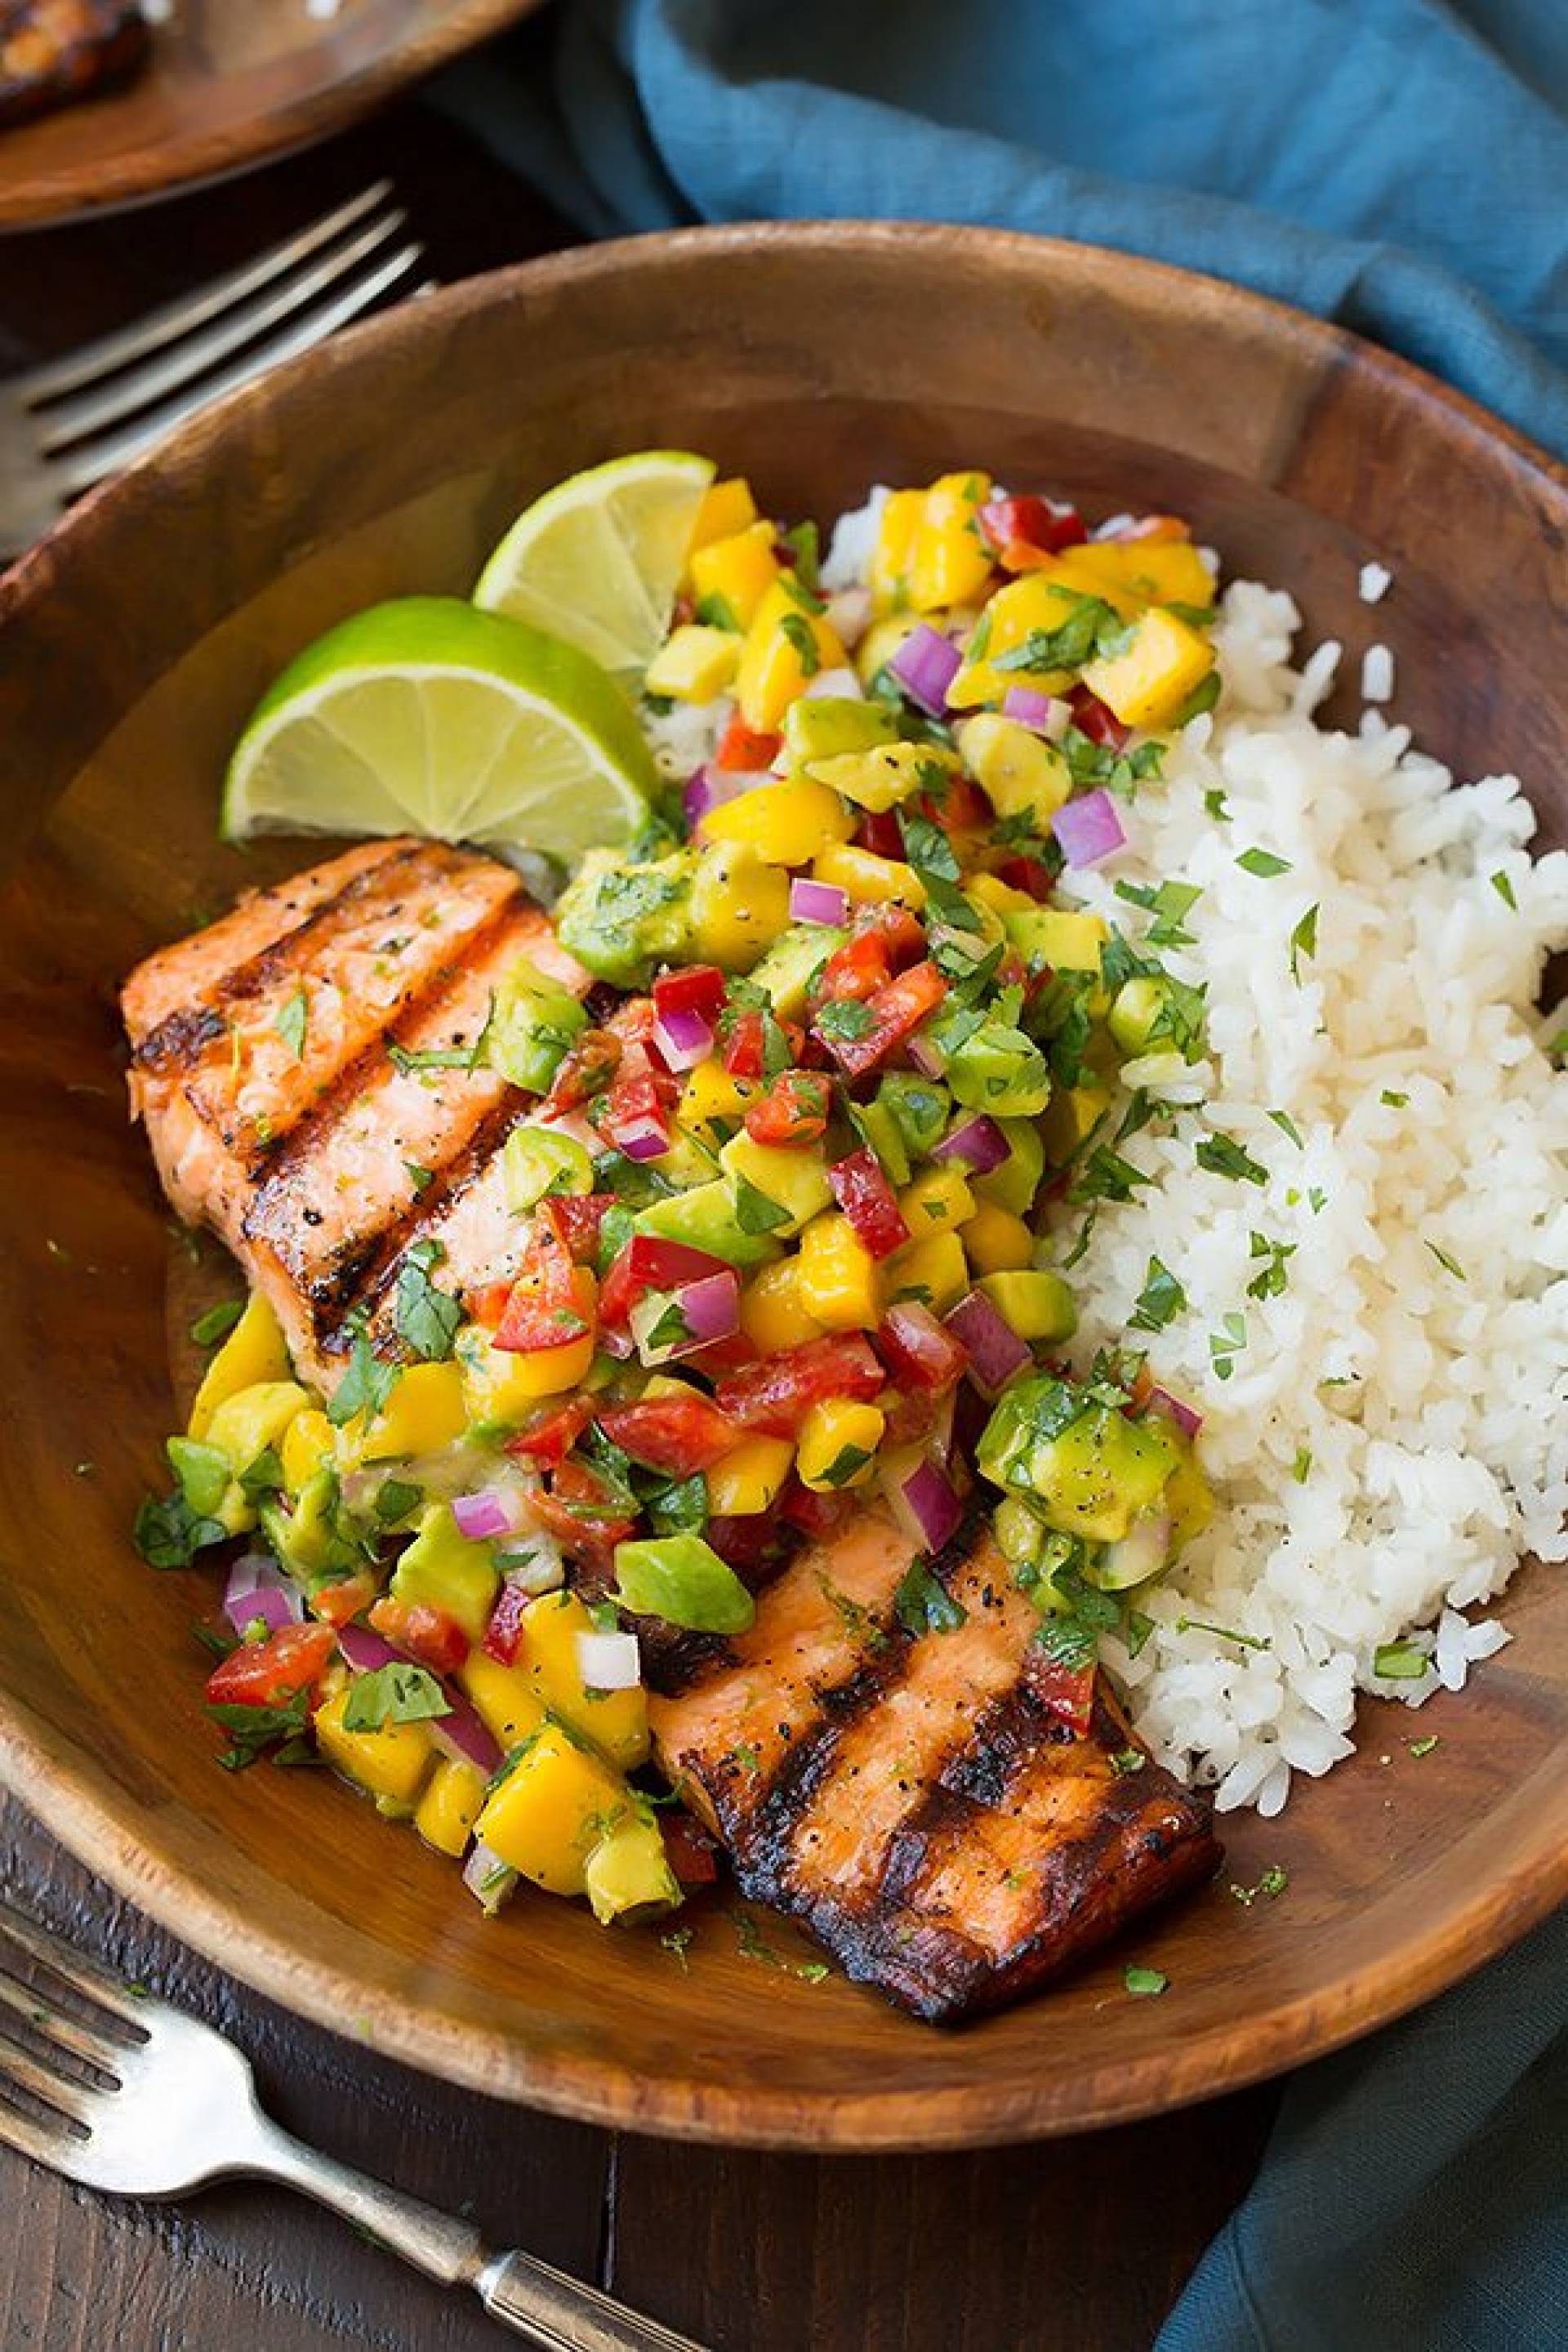 Chili Lime Grilled Salmon